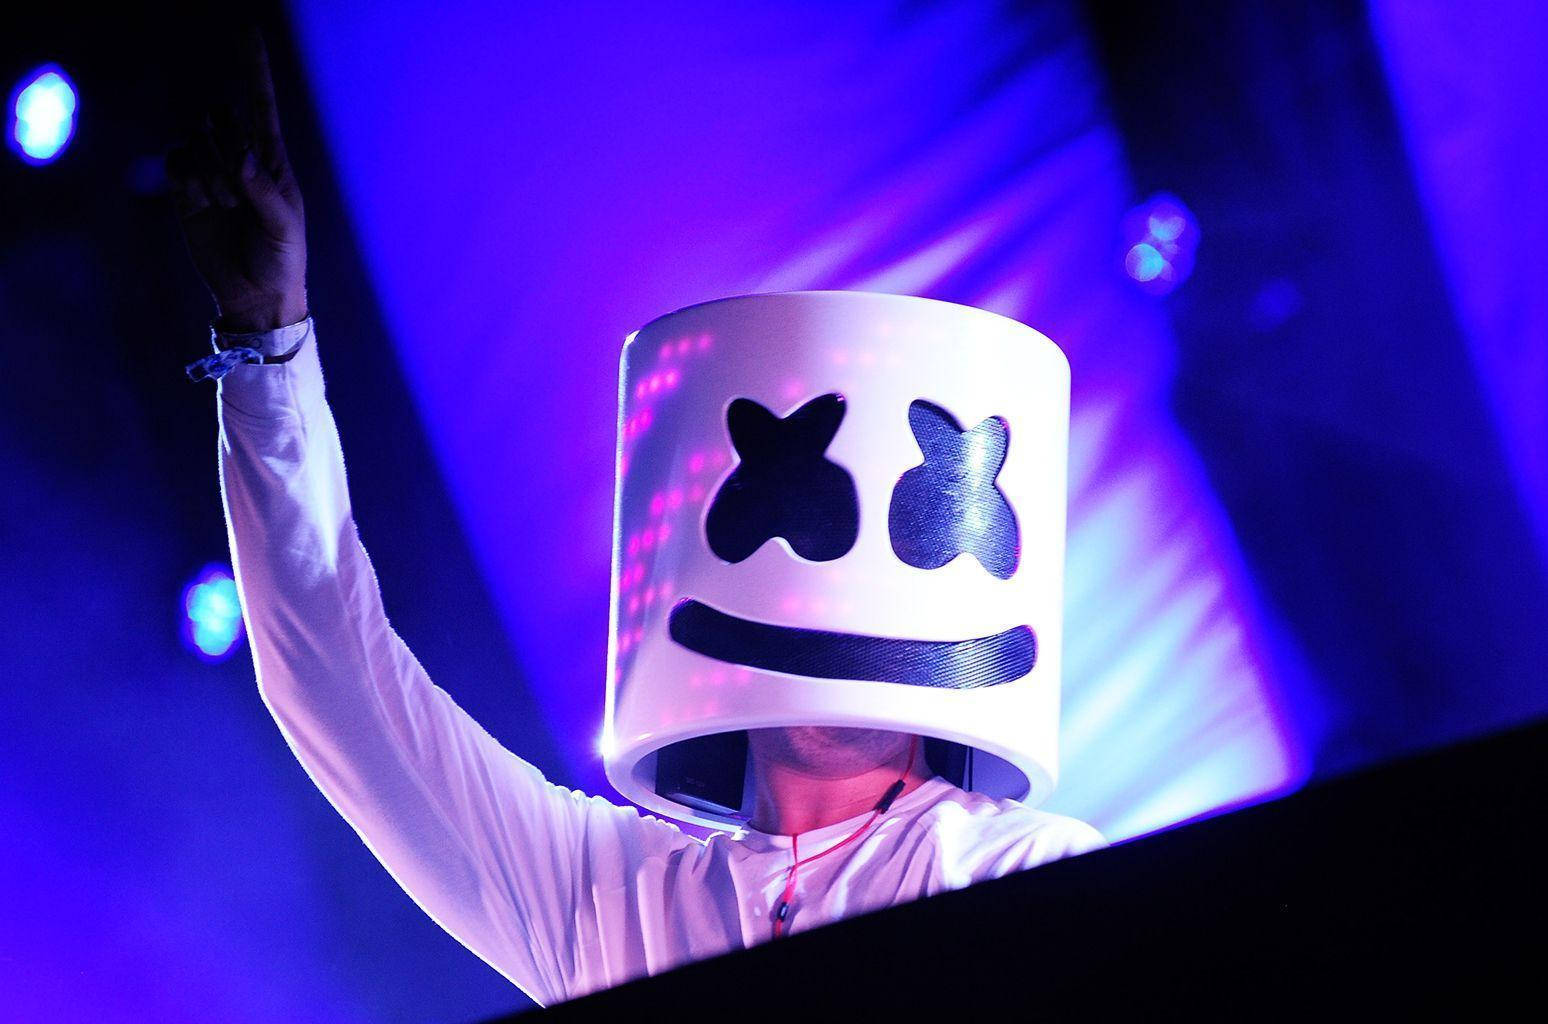 Marshmello performing on a neon-lit blue stage Wallpaper